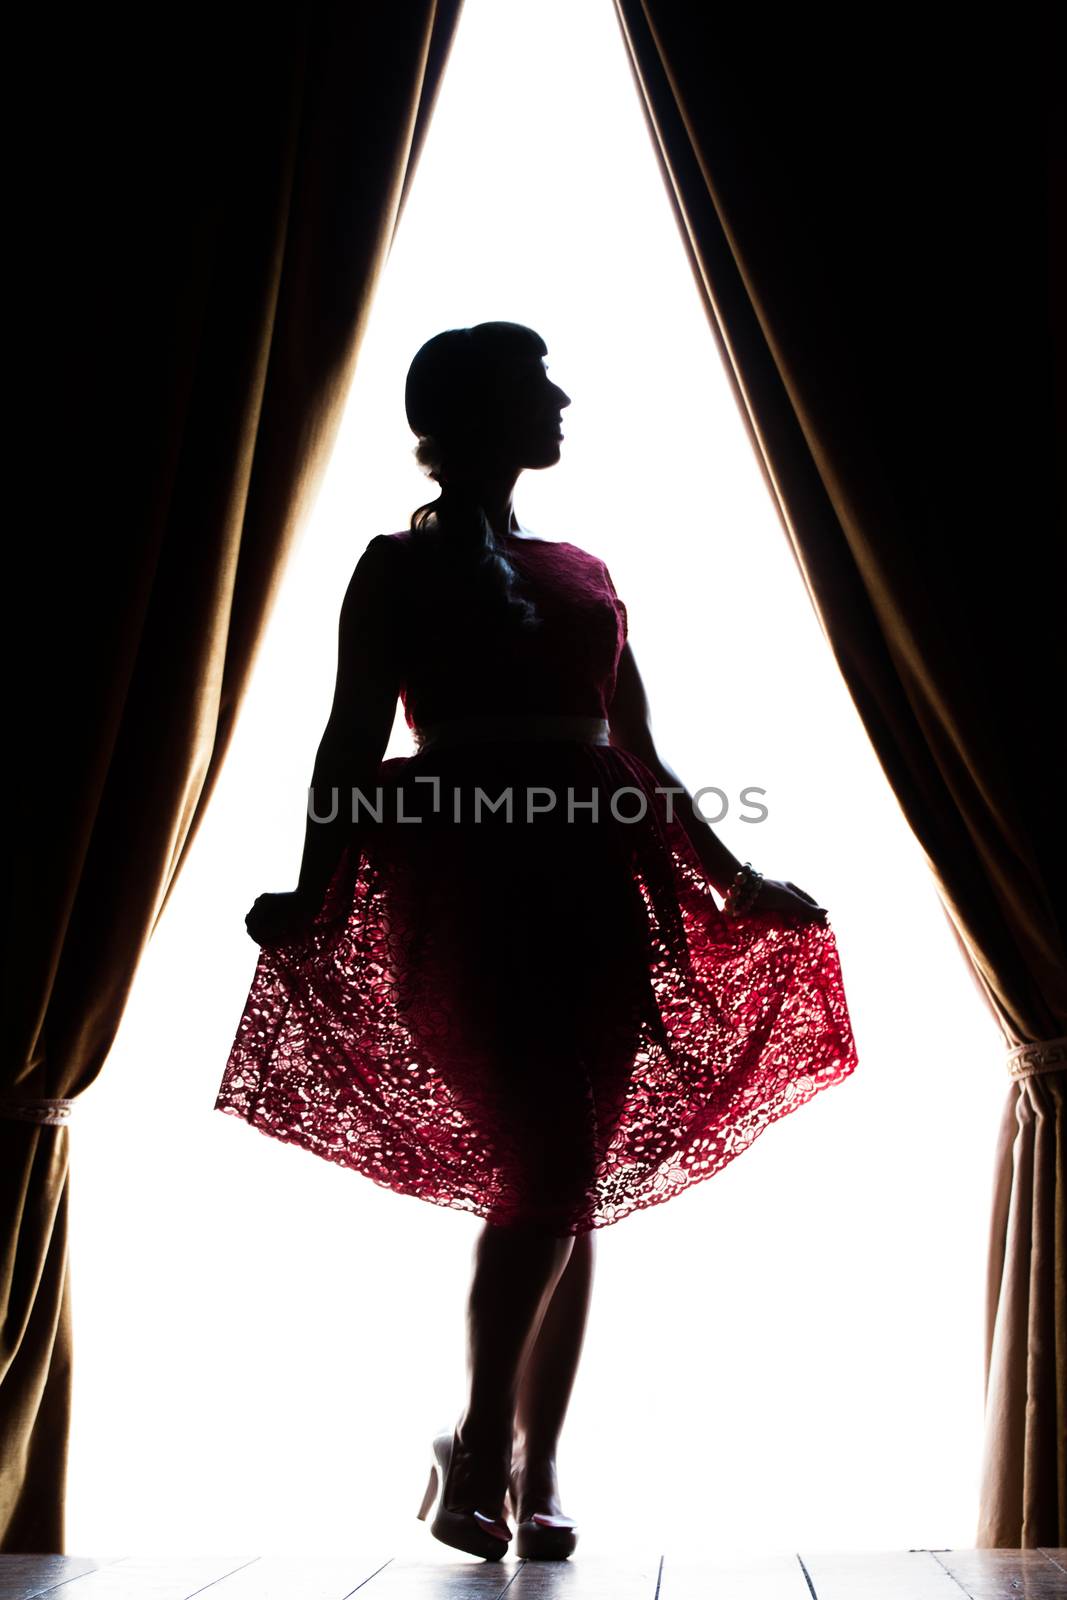 Silhouette of pinup girl with red dress next to a classic window.